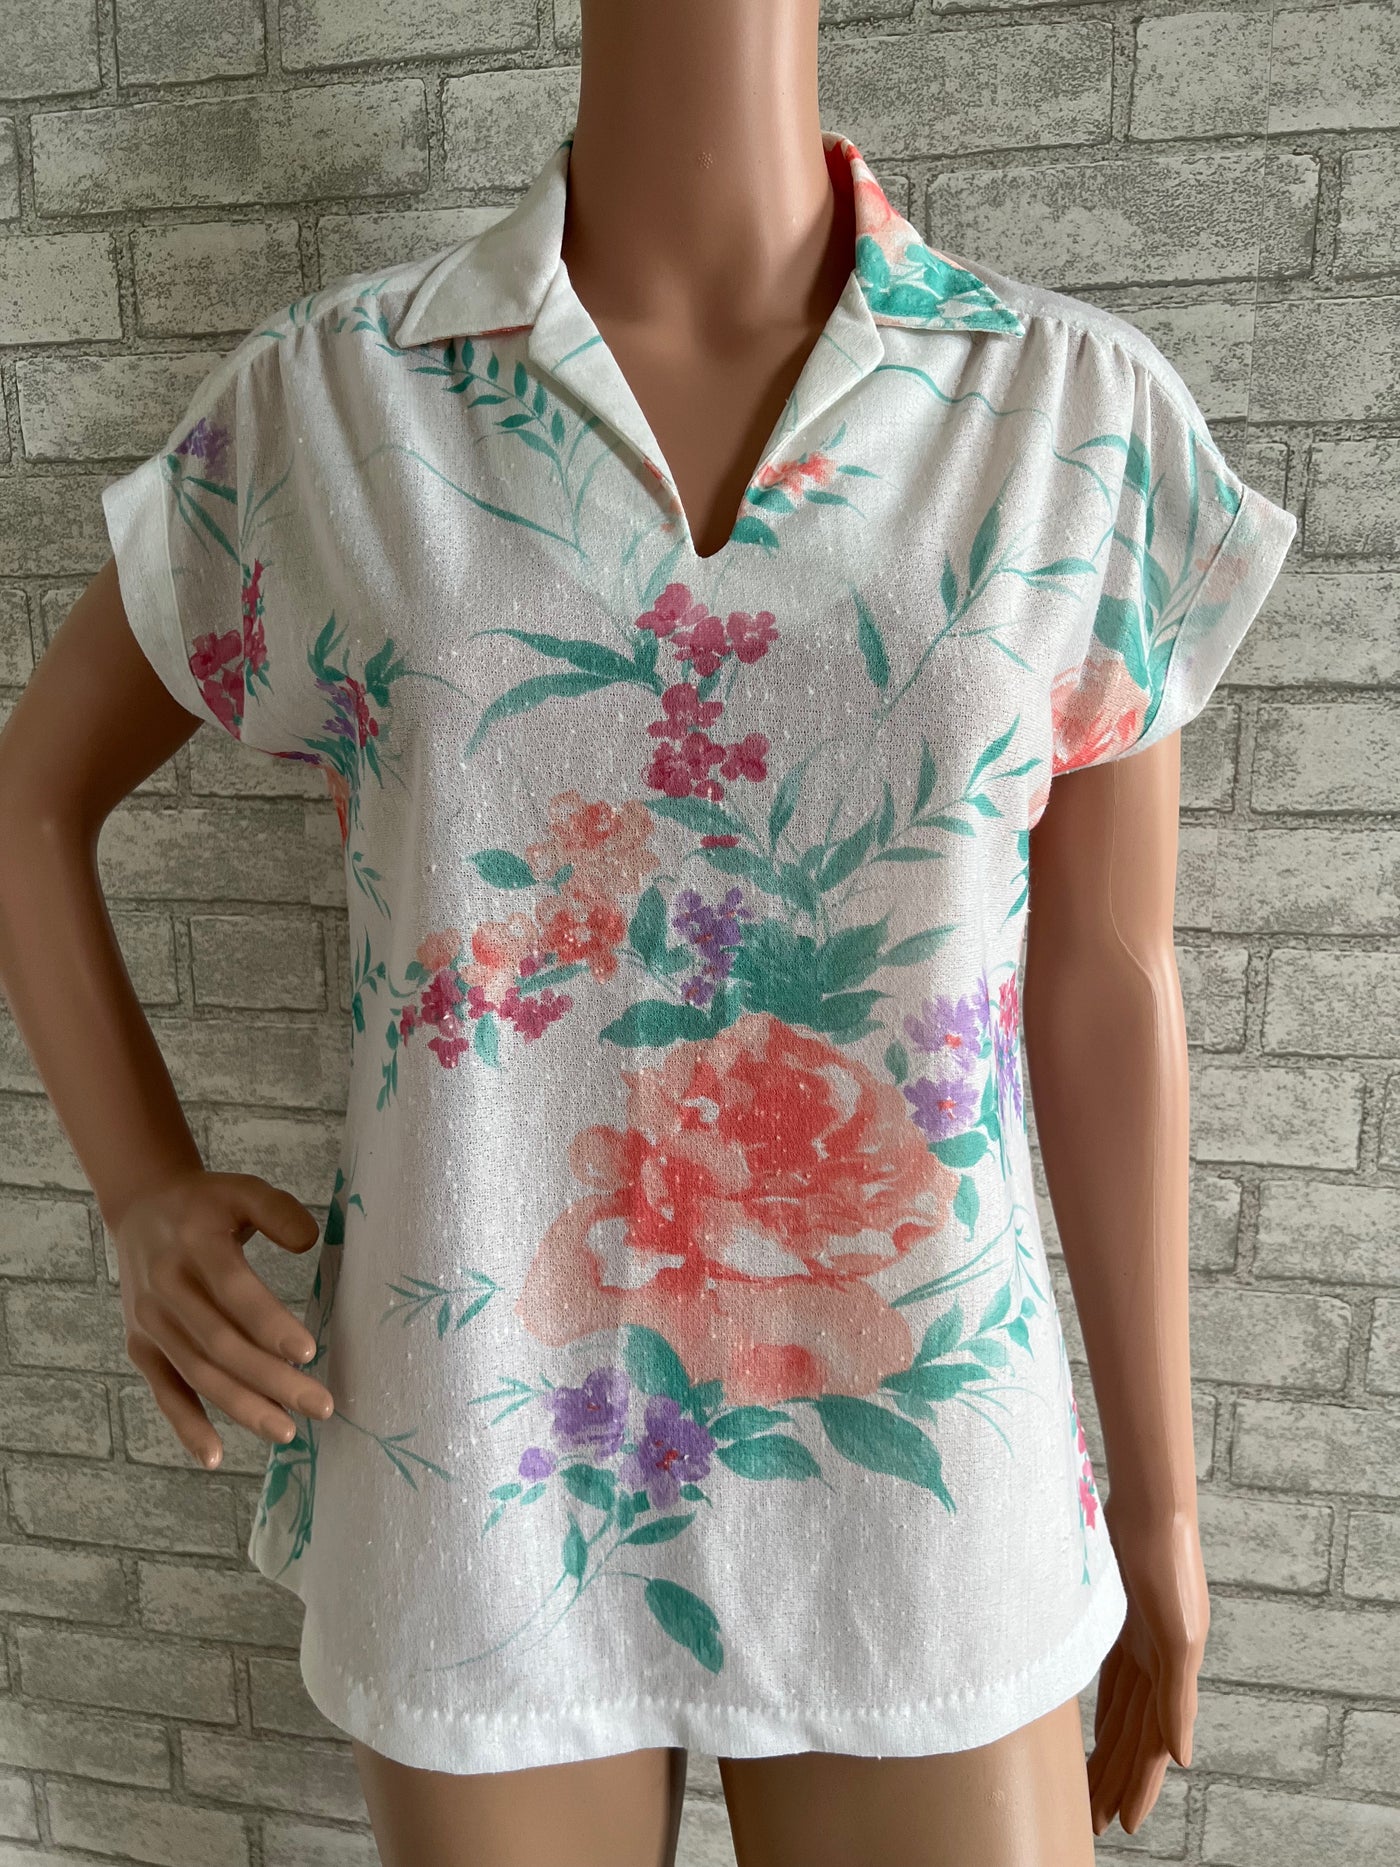 Vintage Thin White Blouse with flowers